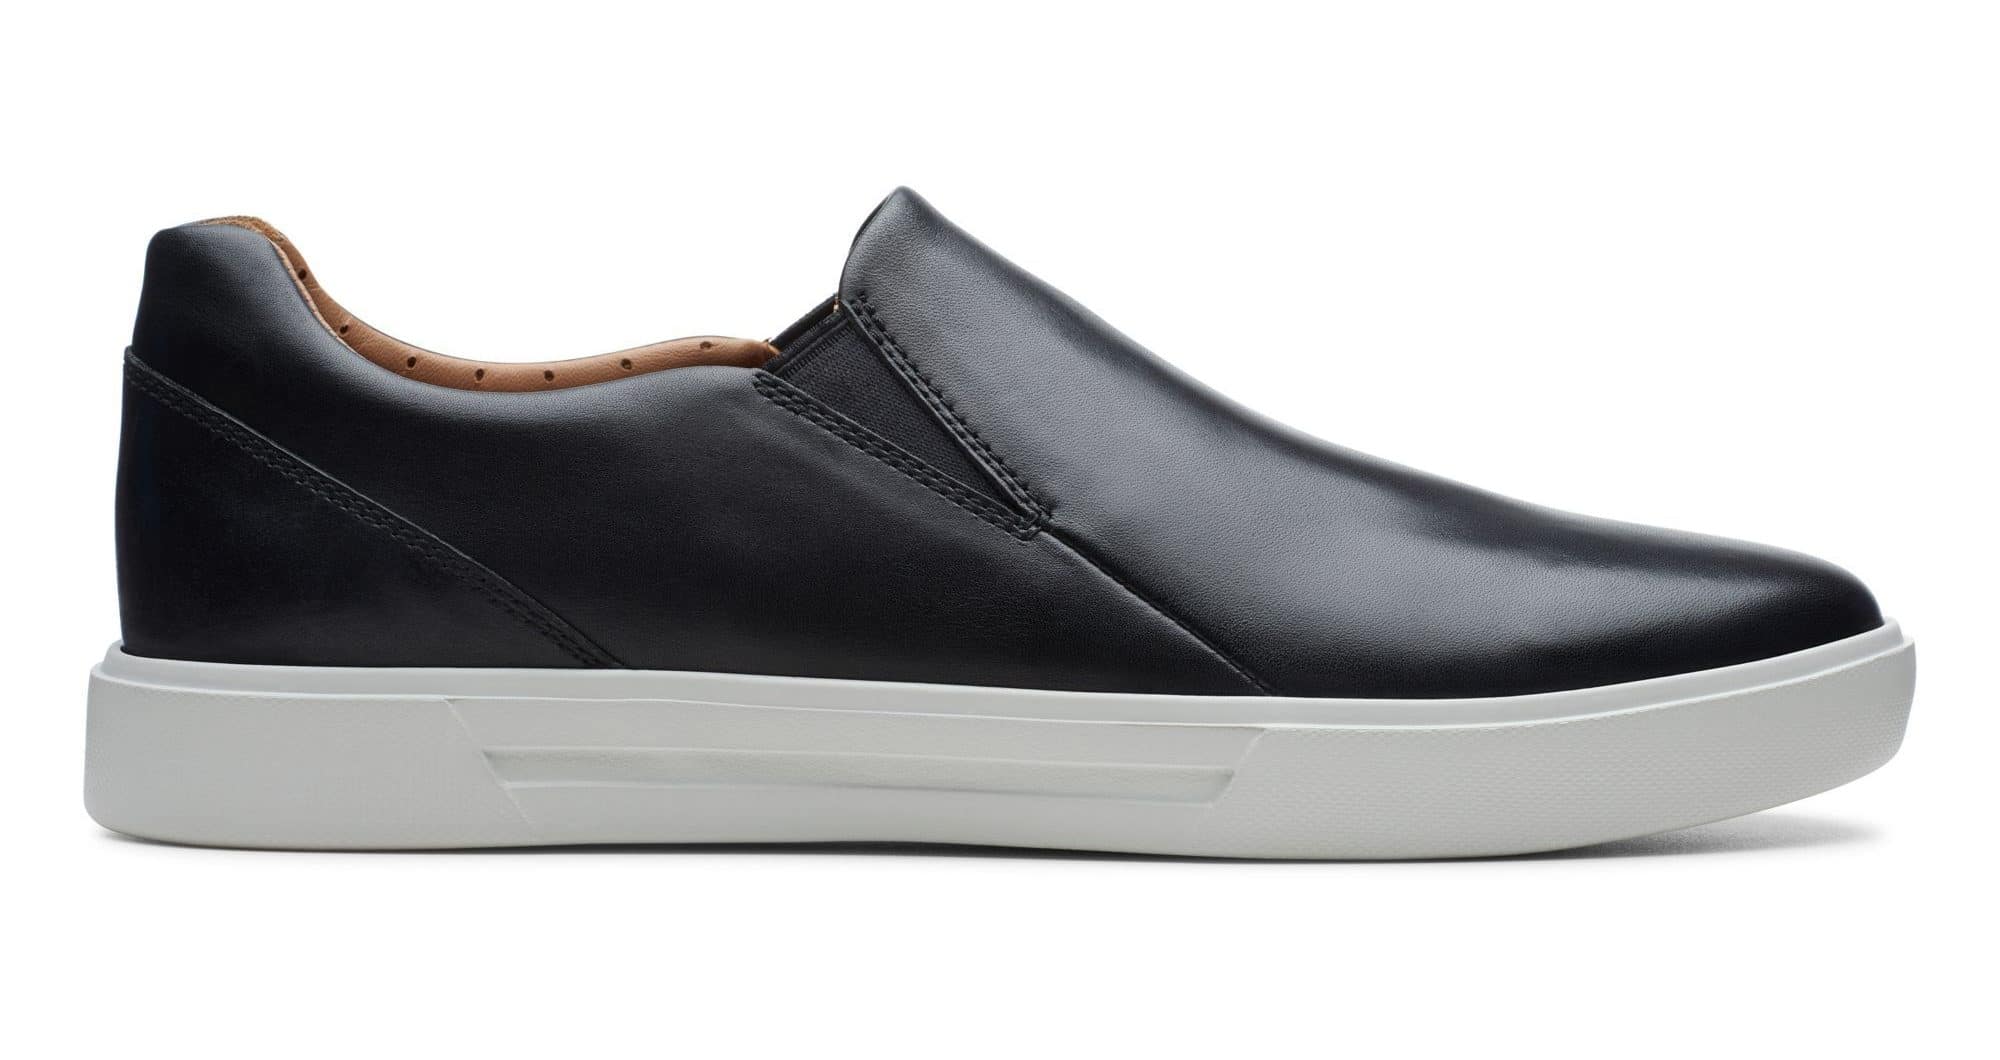 16 Best Men’s Slip-On Shoes to Buy for 2021 - The Modest Man